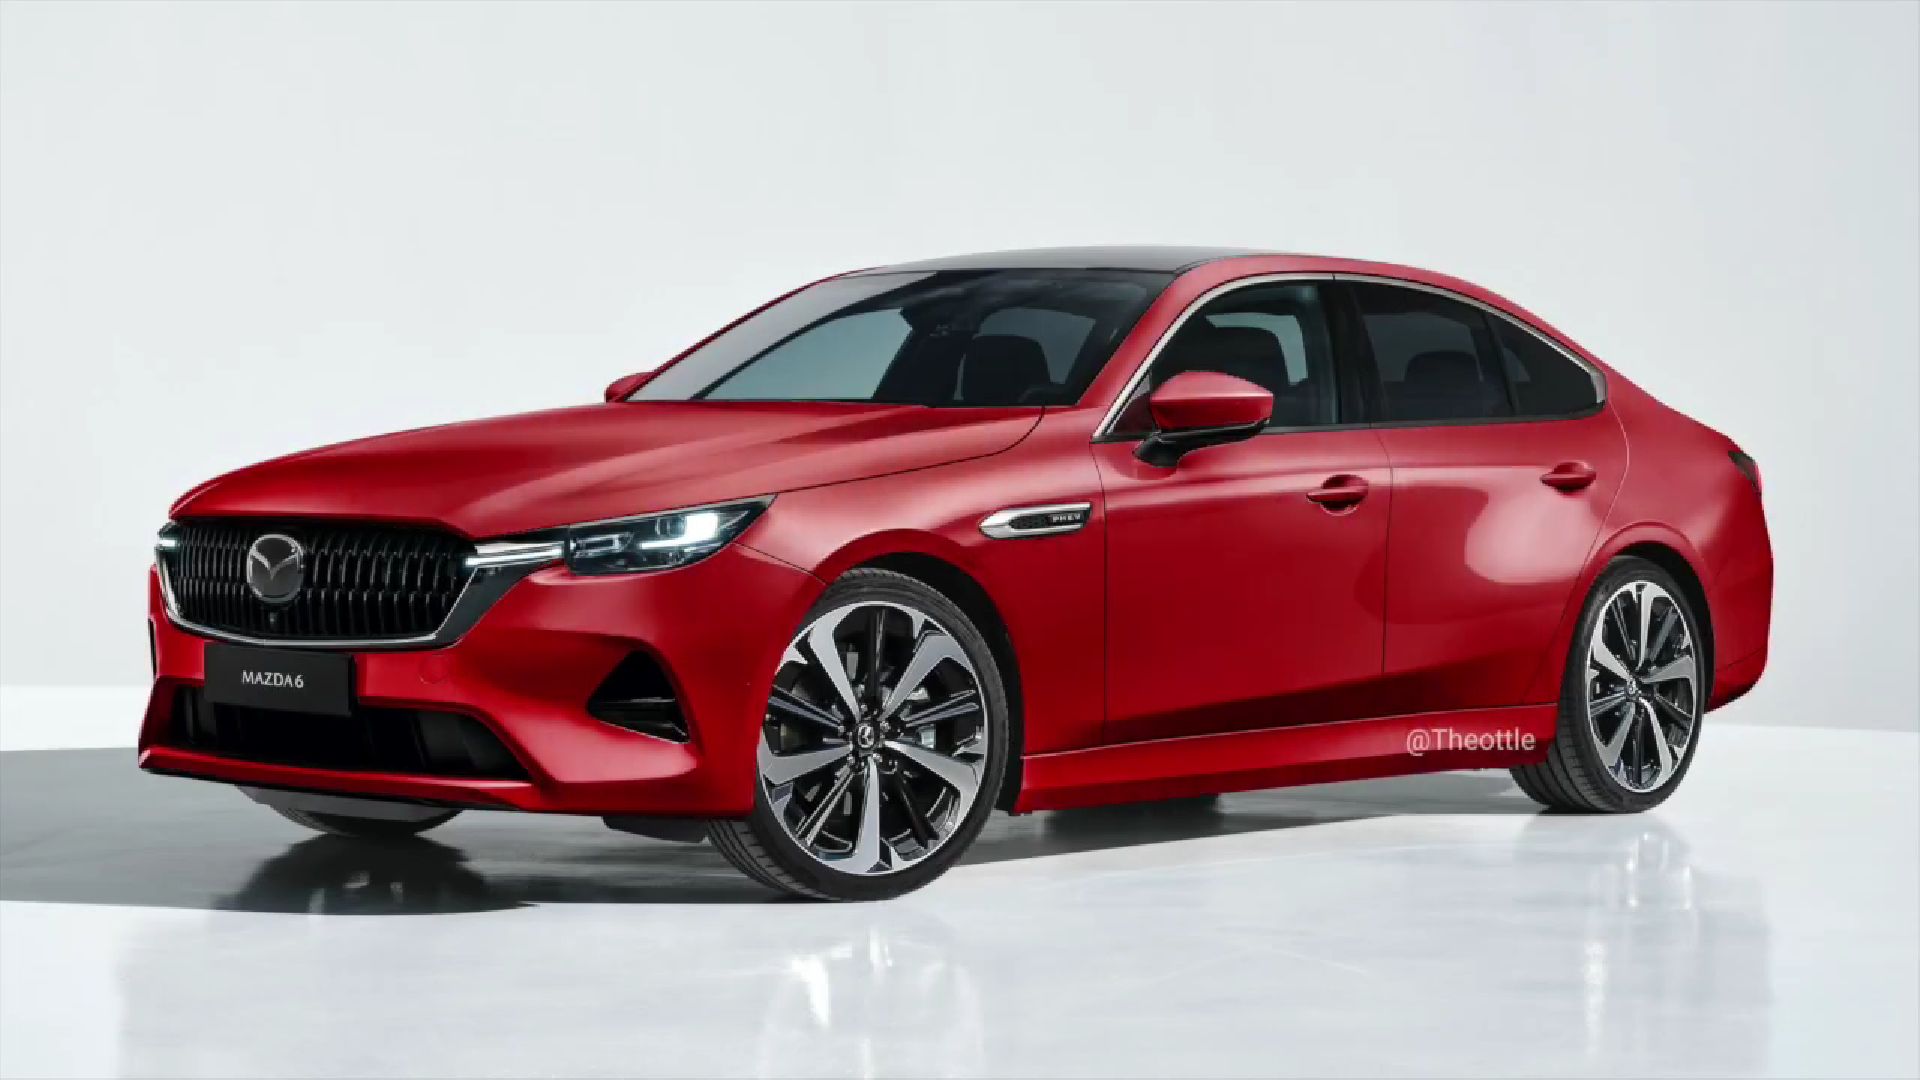 2025-mazda6-sedan-speculatively-rendered-new-generation-may-go-rwd-with-i6-engines-3.jpg